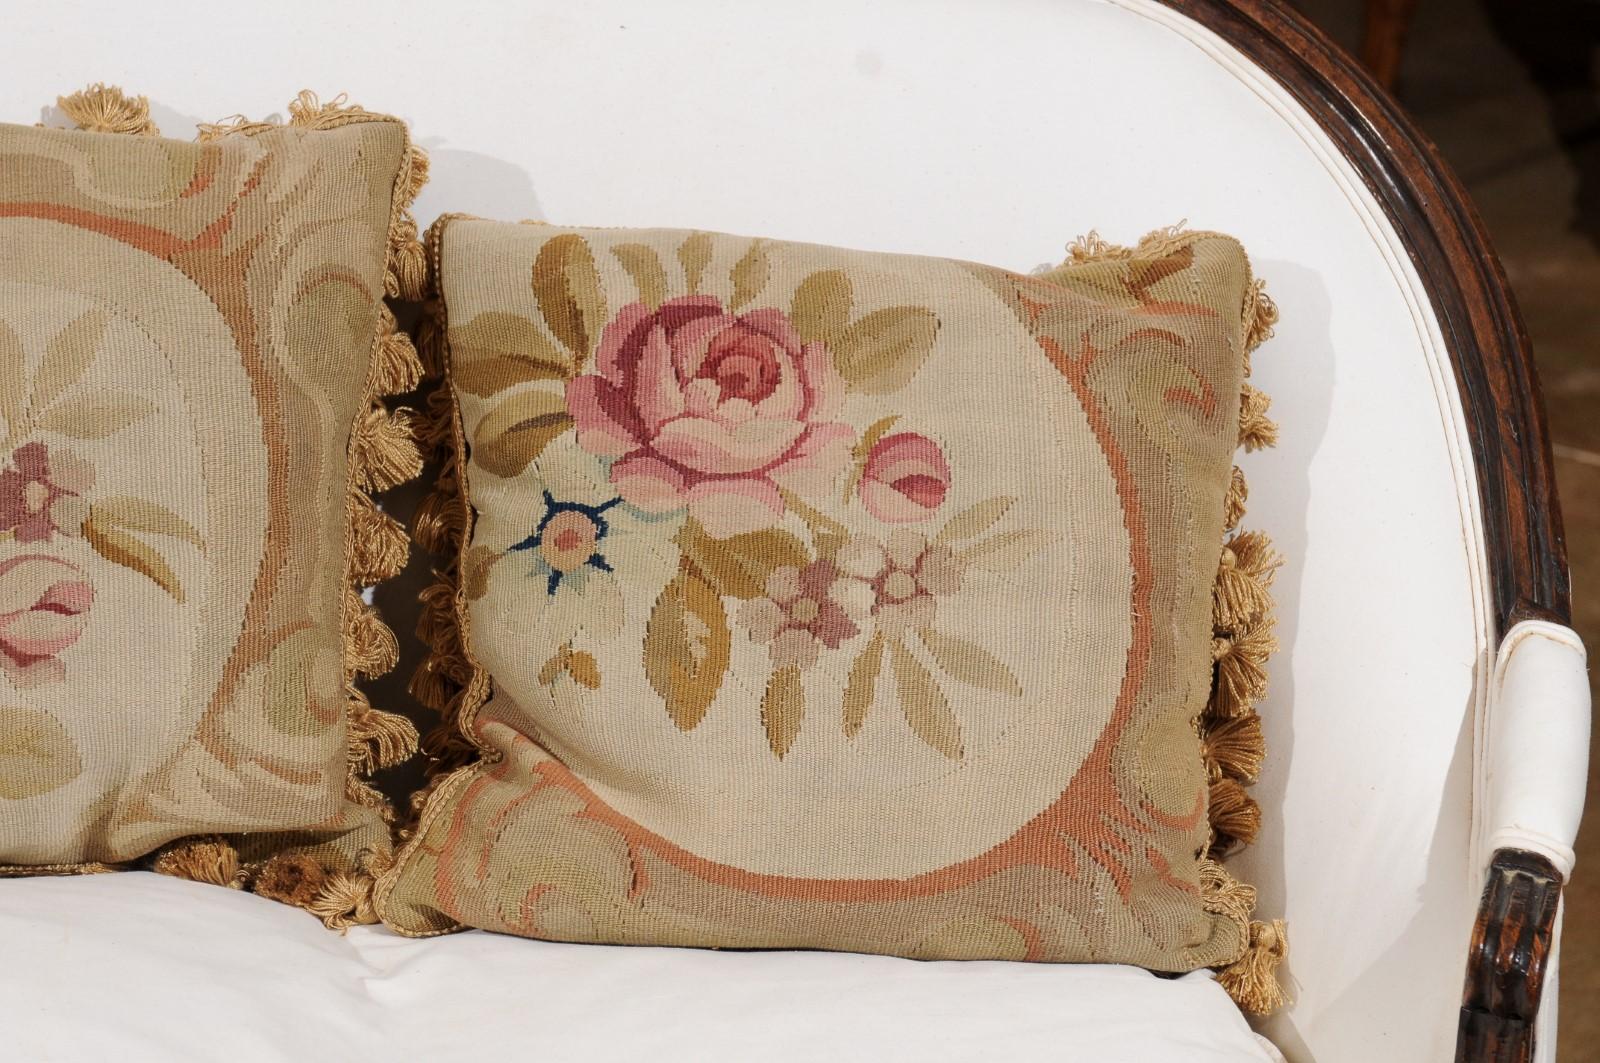 French 19th Century Aubusson Woven Tapestry Pillow with Roses and Tassels For Sale 3